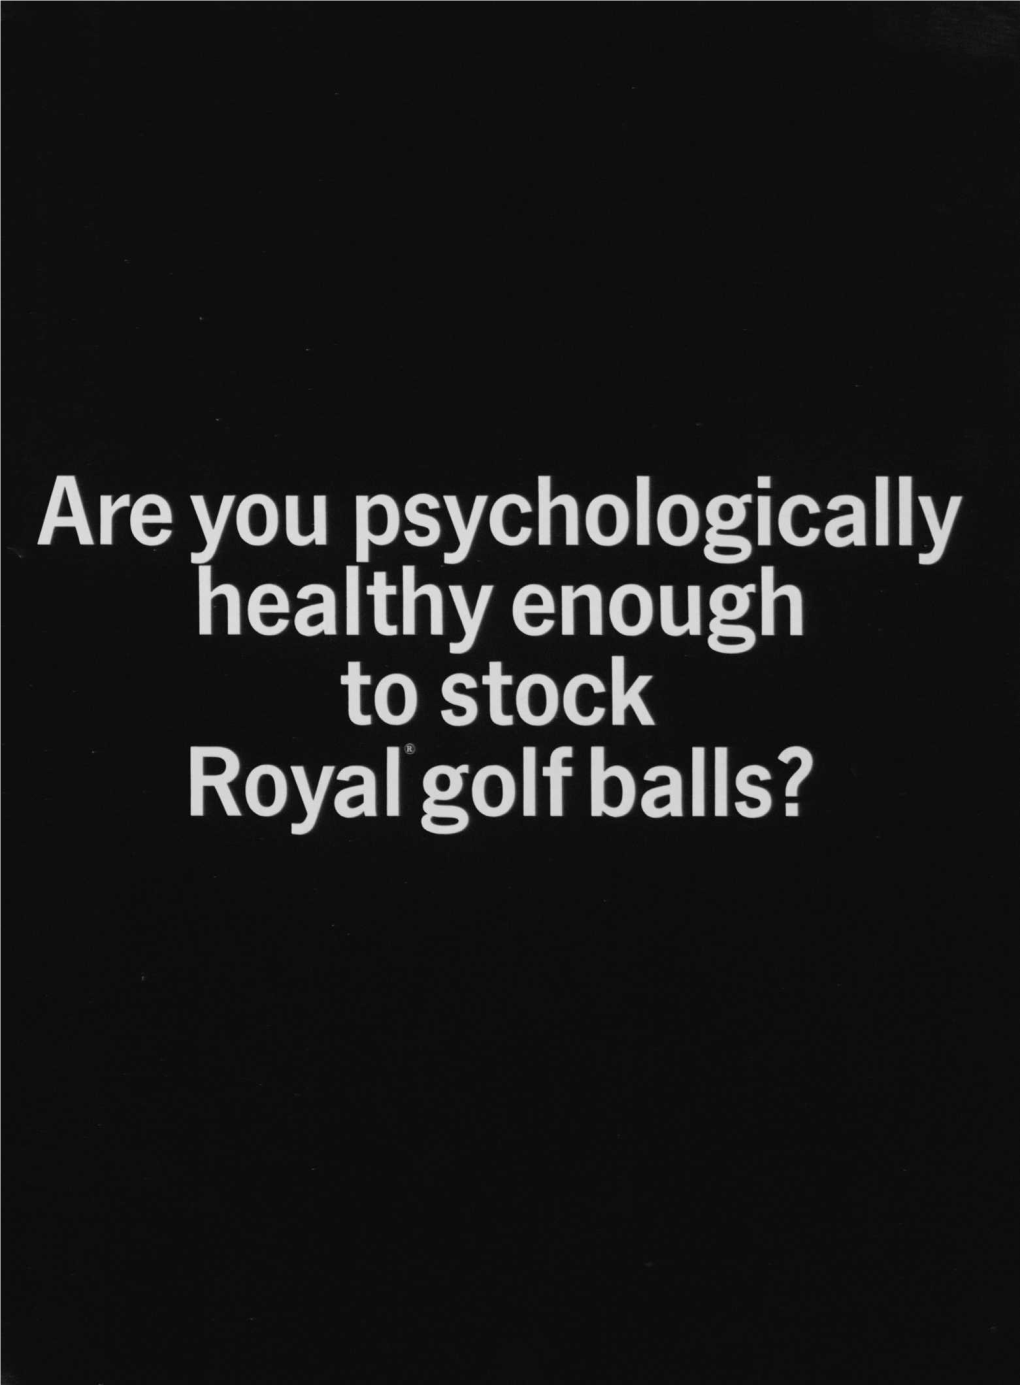 Are You Psychologically Healthy Enough to Stock Royal Golf Balls?